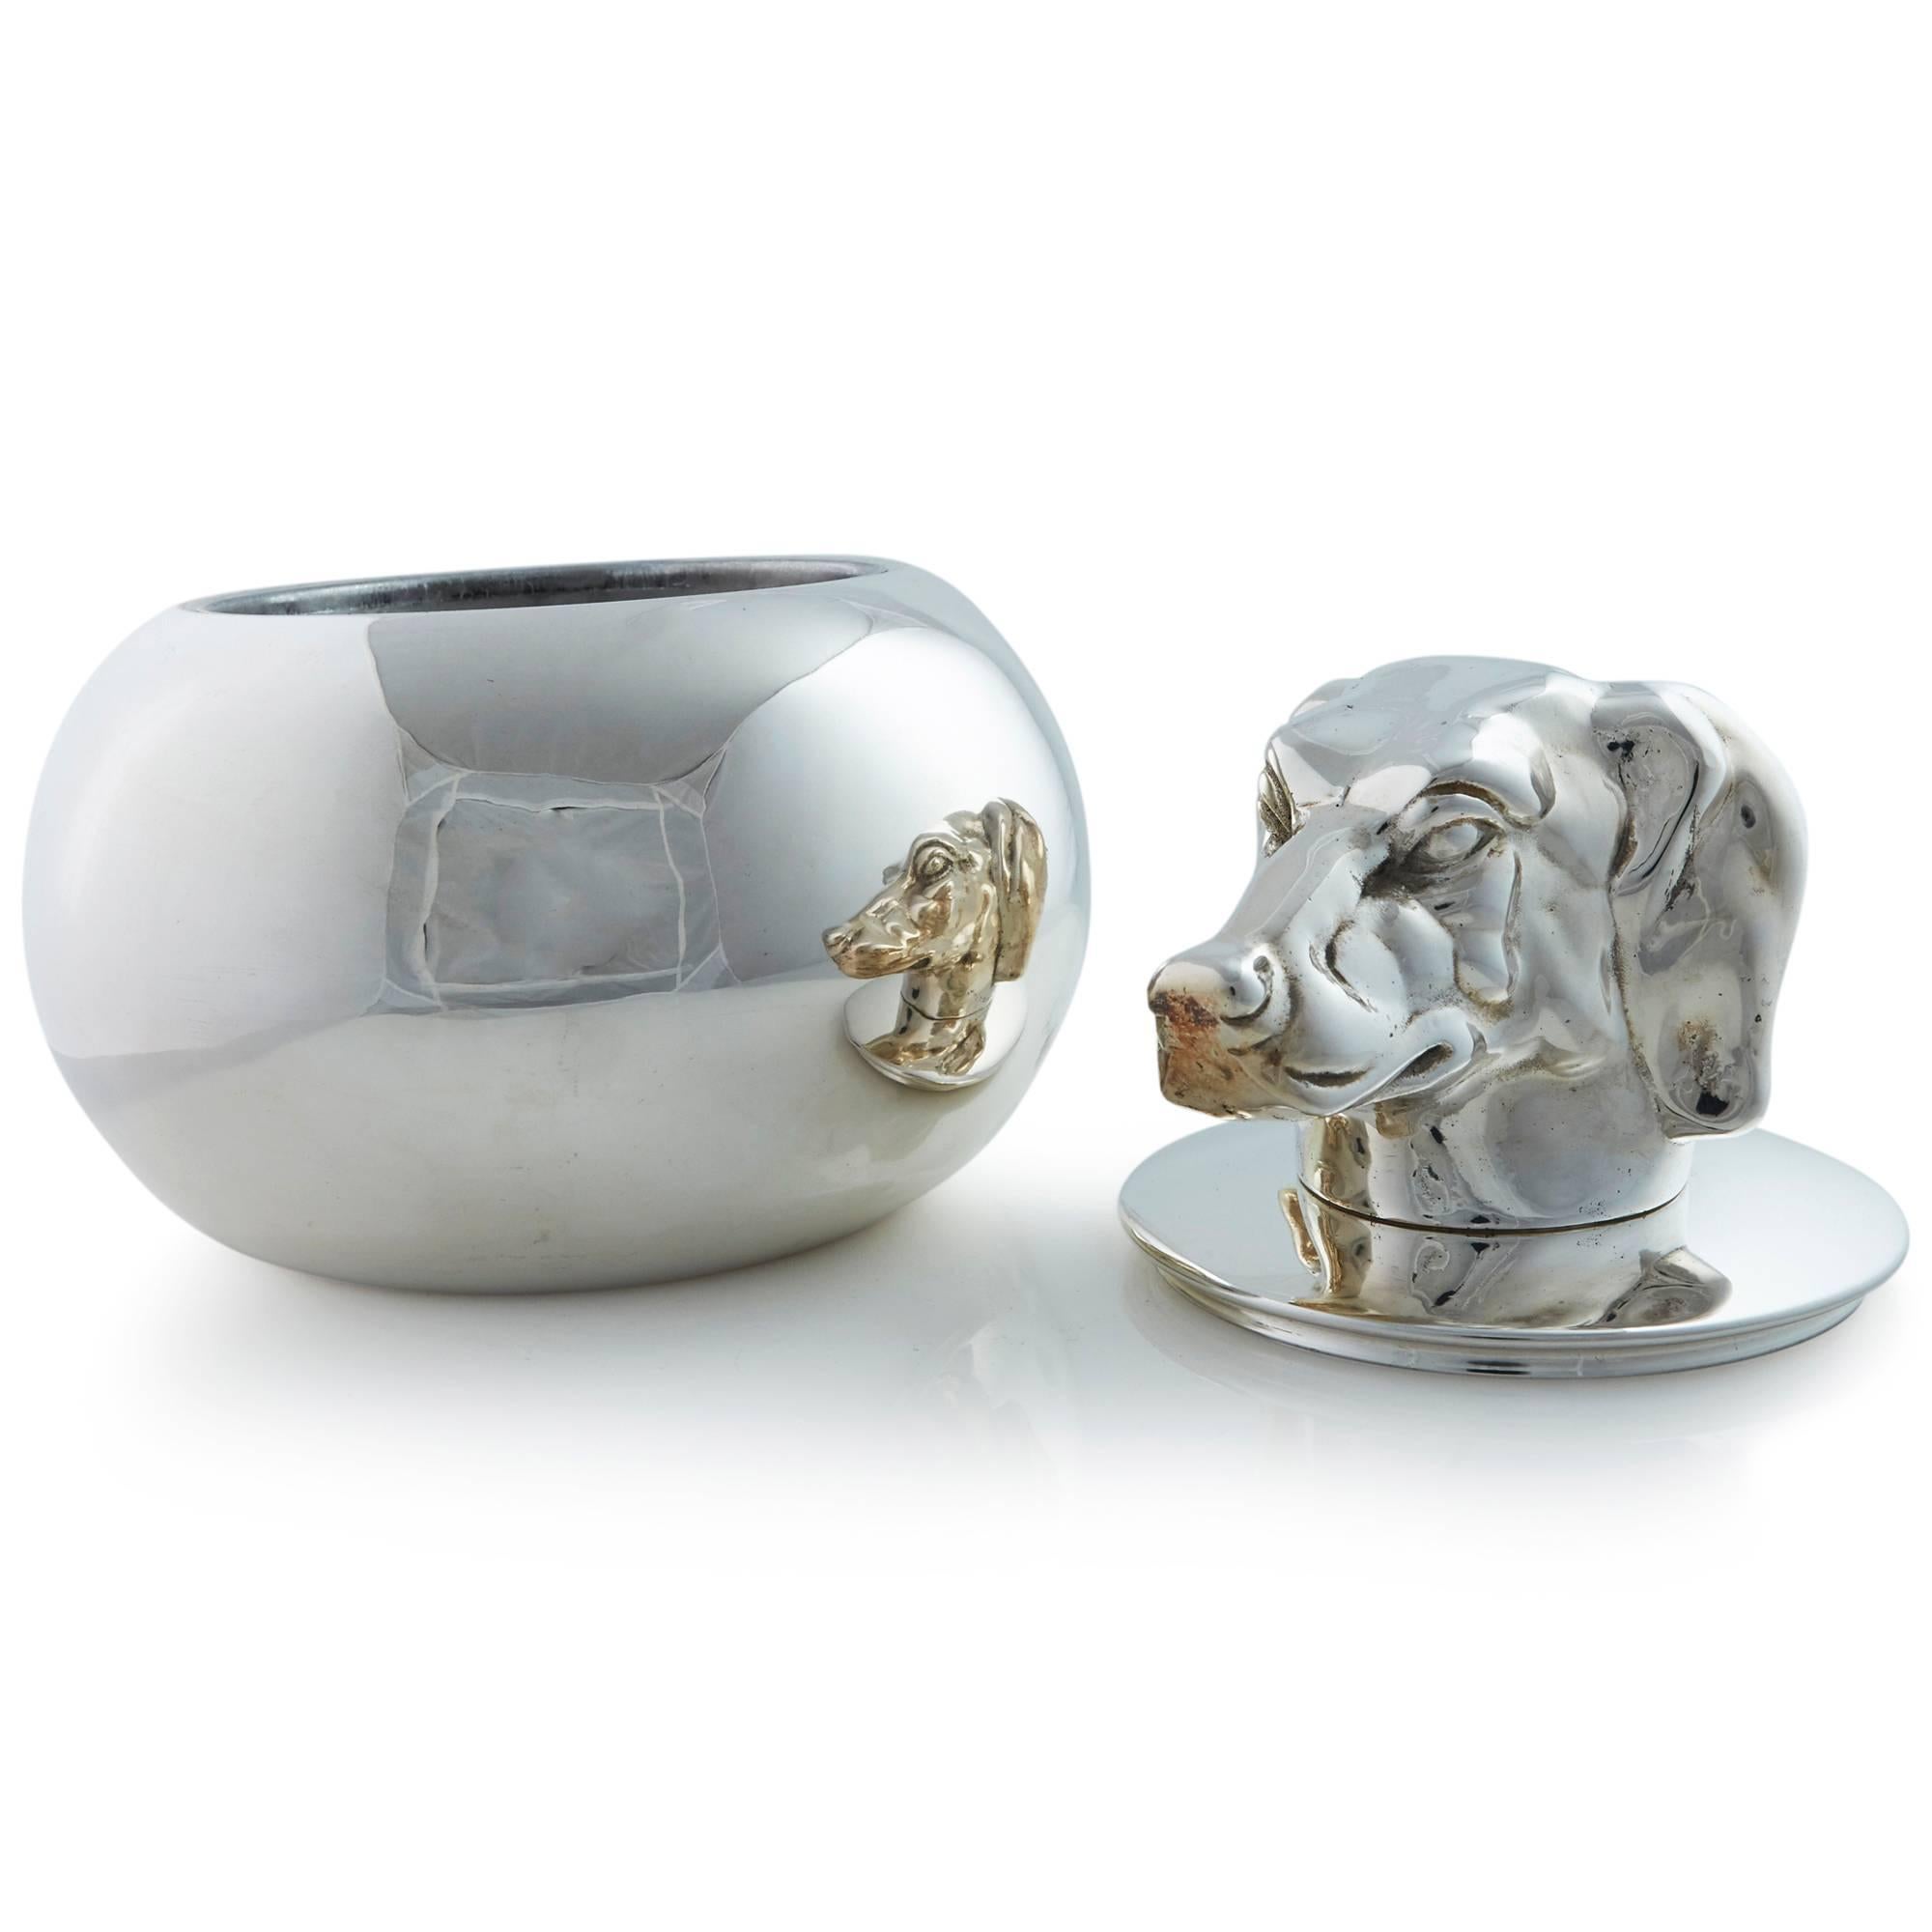 Stunning Italian silver plated ice bucket with articulated dog head and pewter liner.